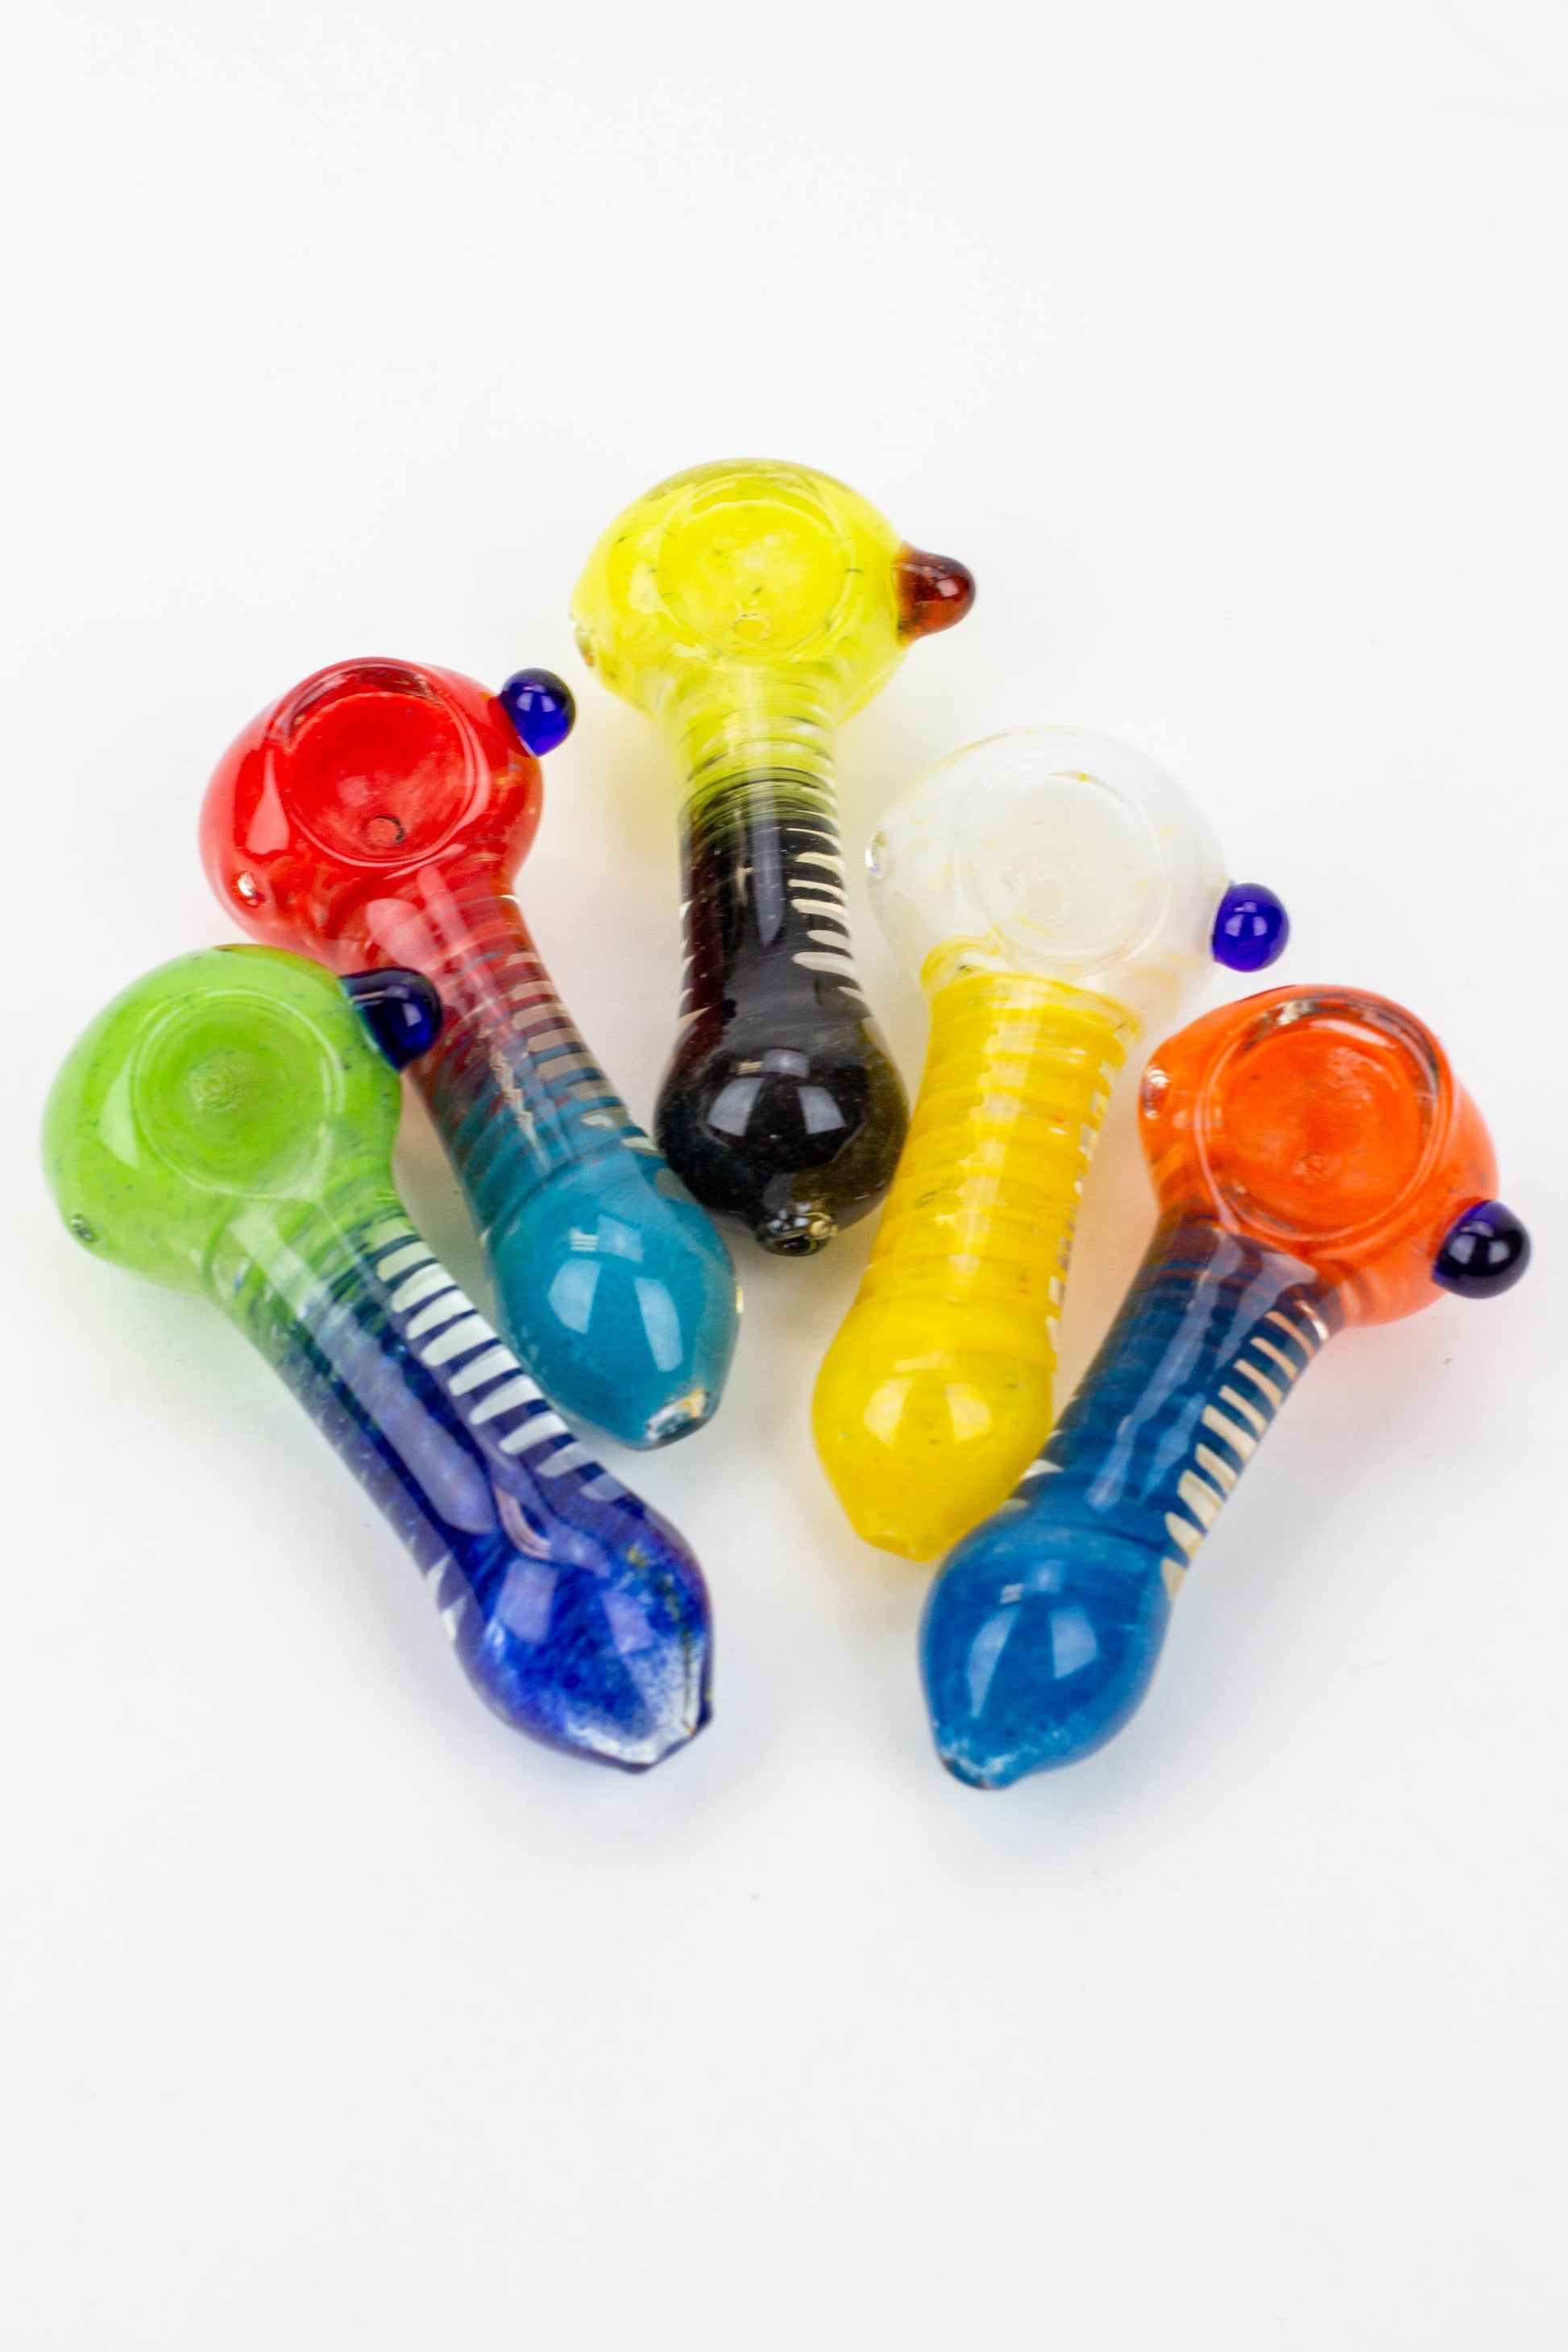 3.5" soft glass hand pipe Flower Power Packages 